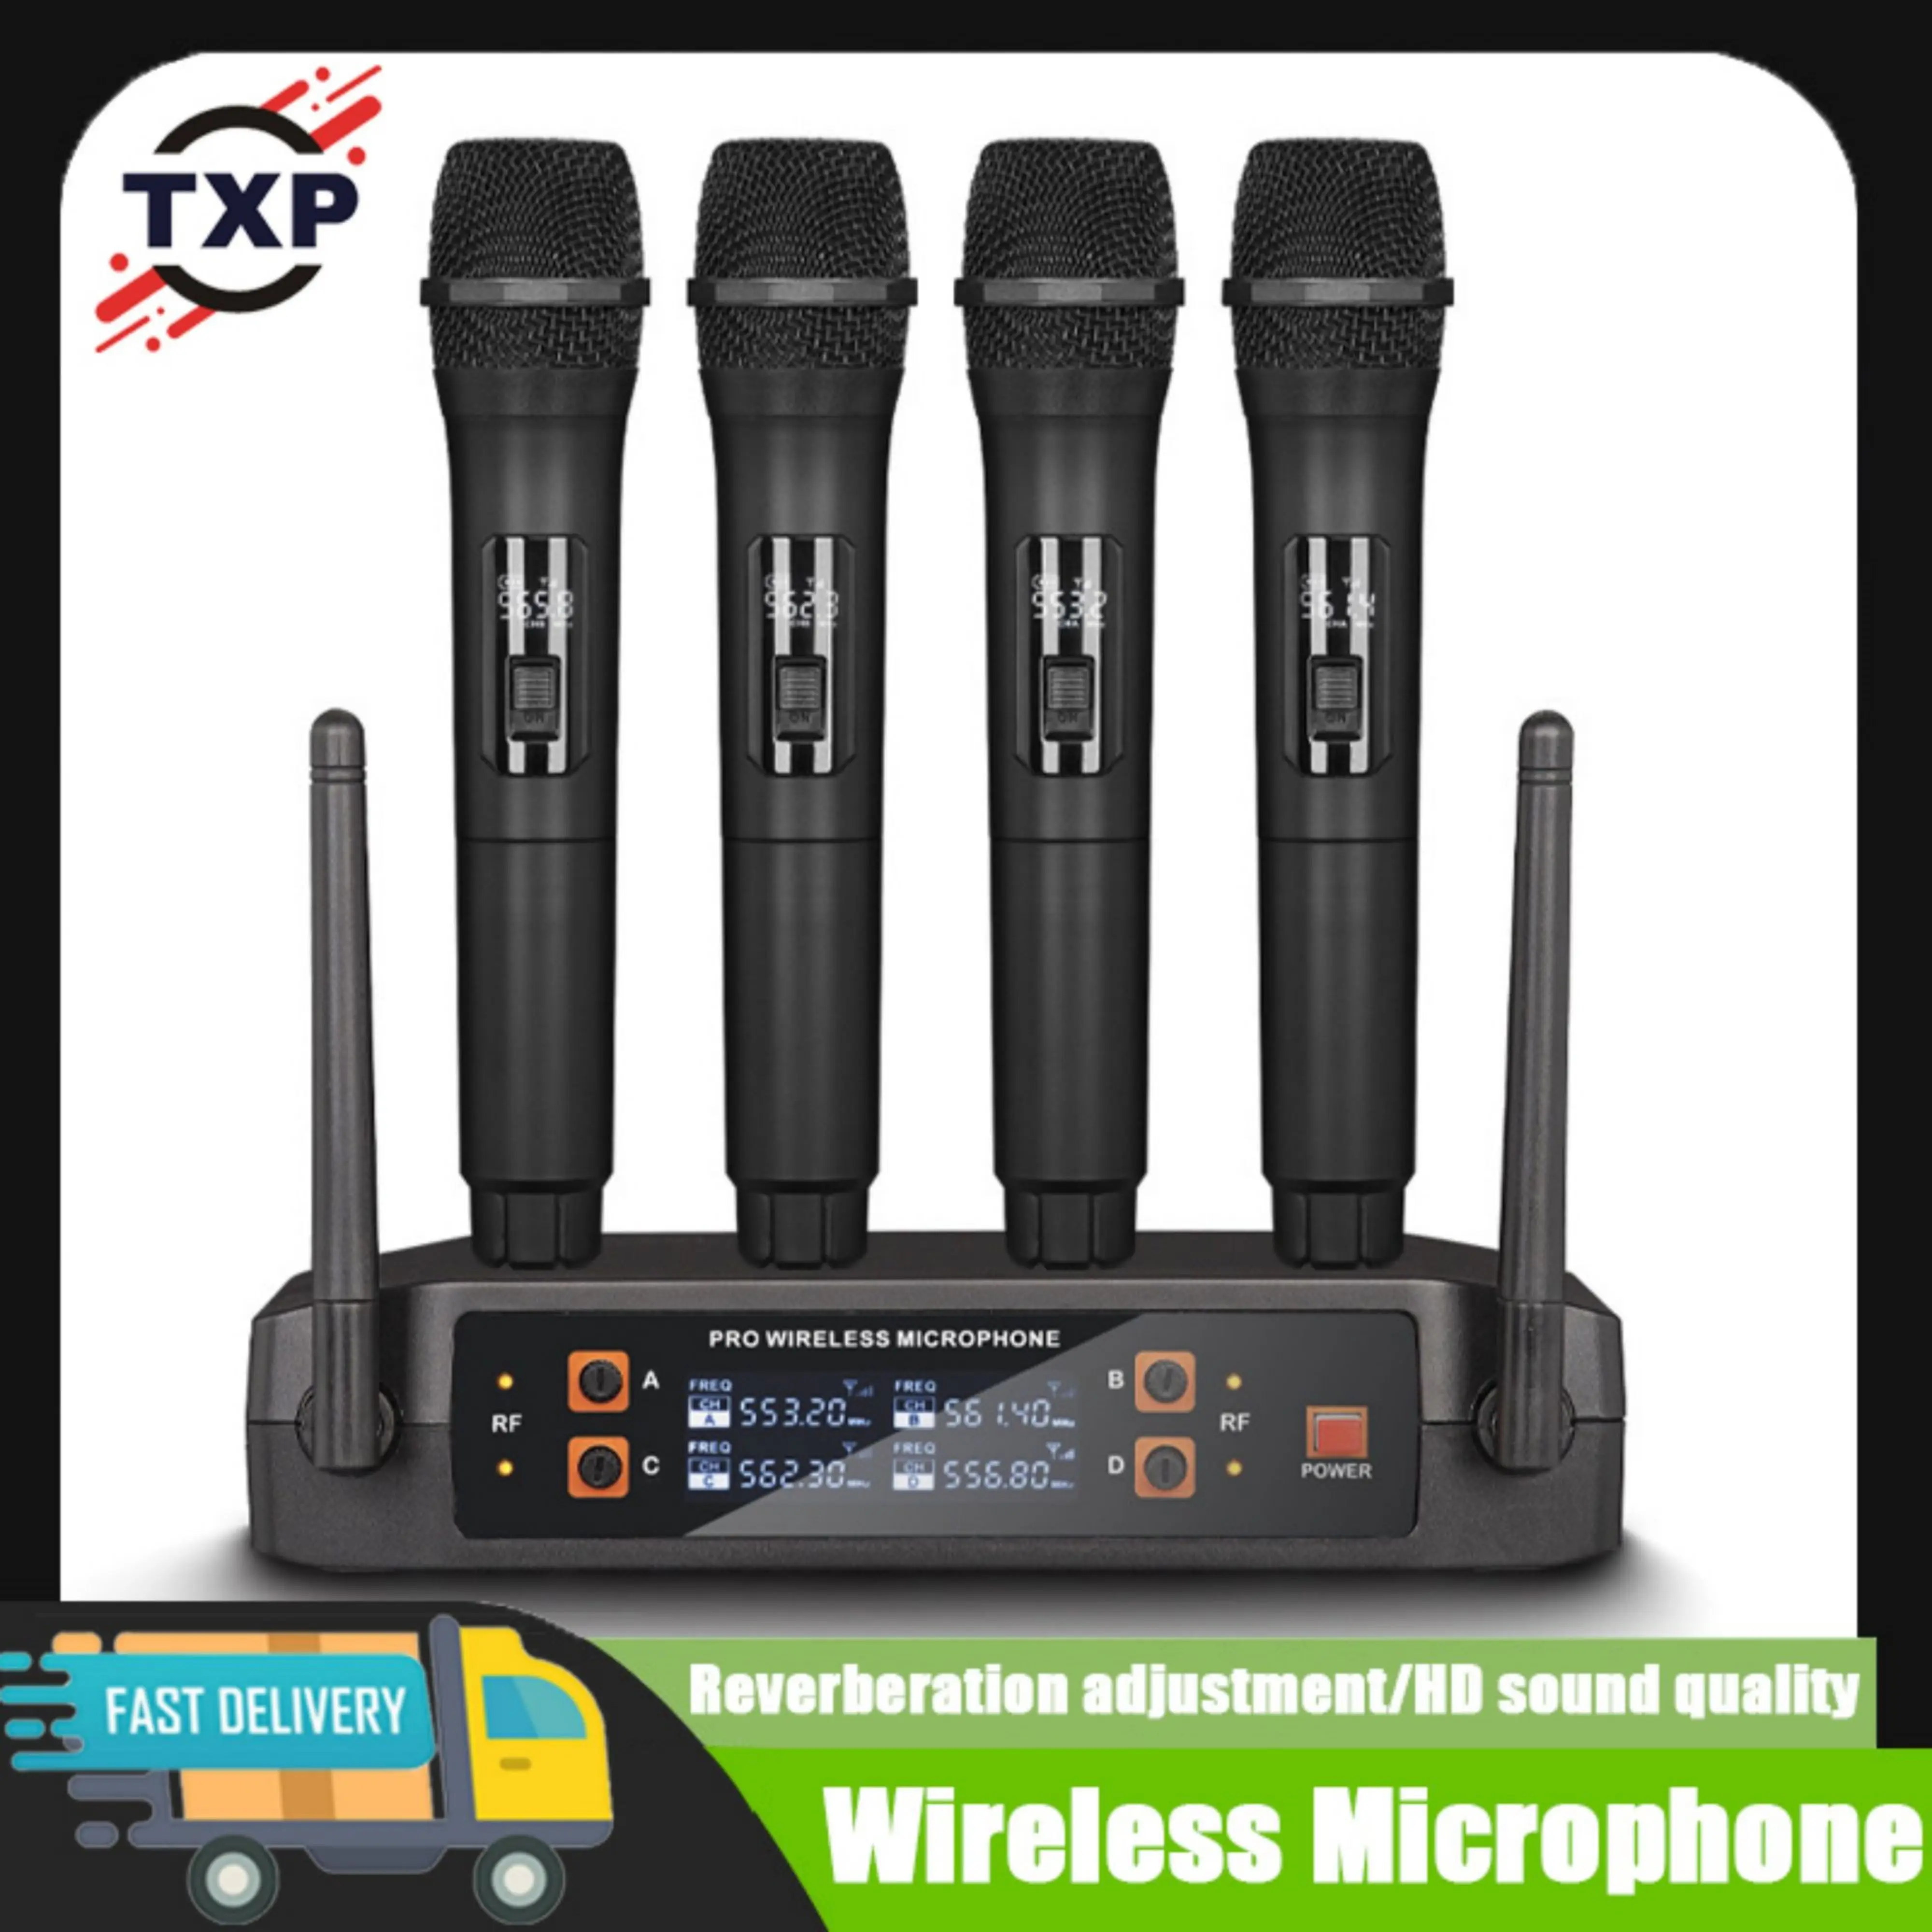 

TXP-WU1 Wireless Microphone Handheld 4 Channel UHF Fixed Frequency Dynamic Microphone For Karaoke Wedding Party Band Performance